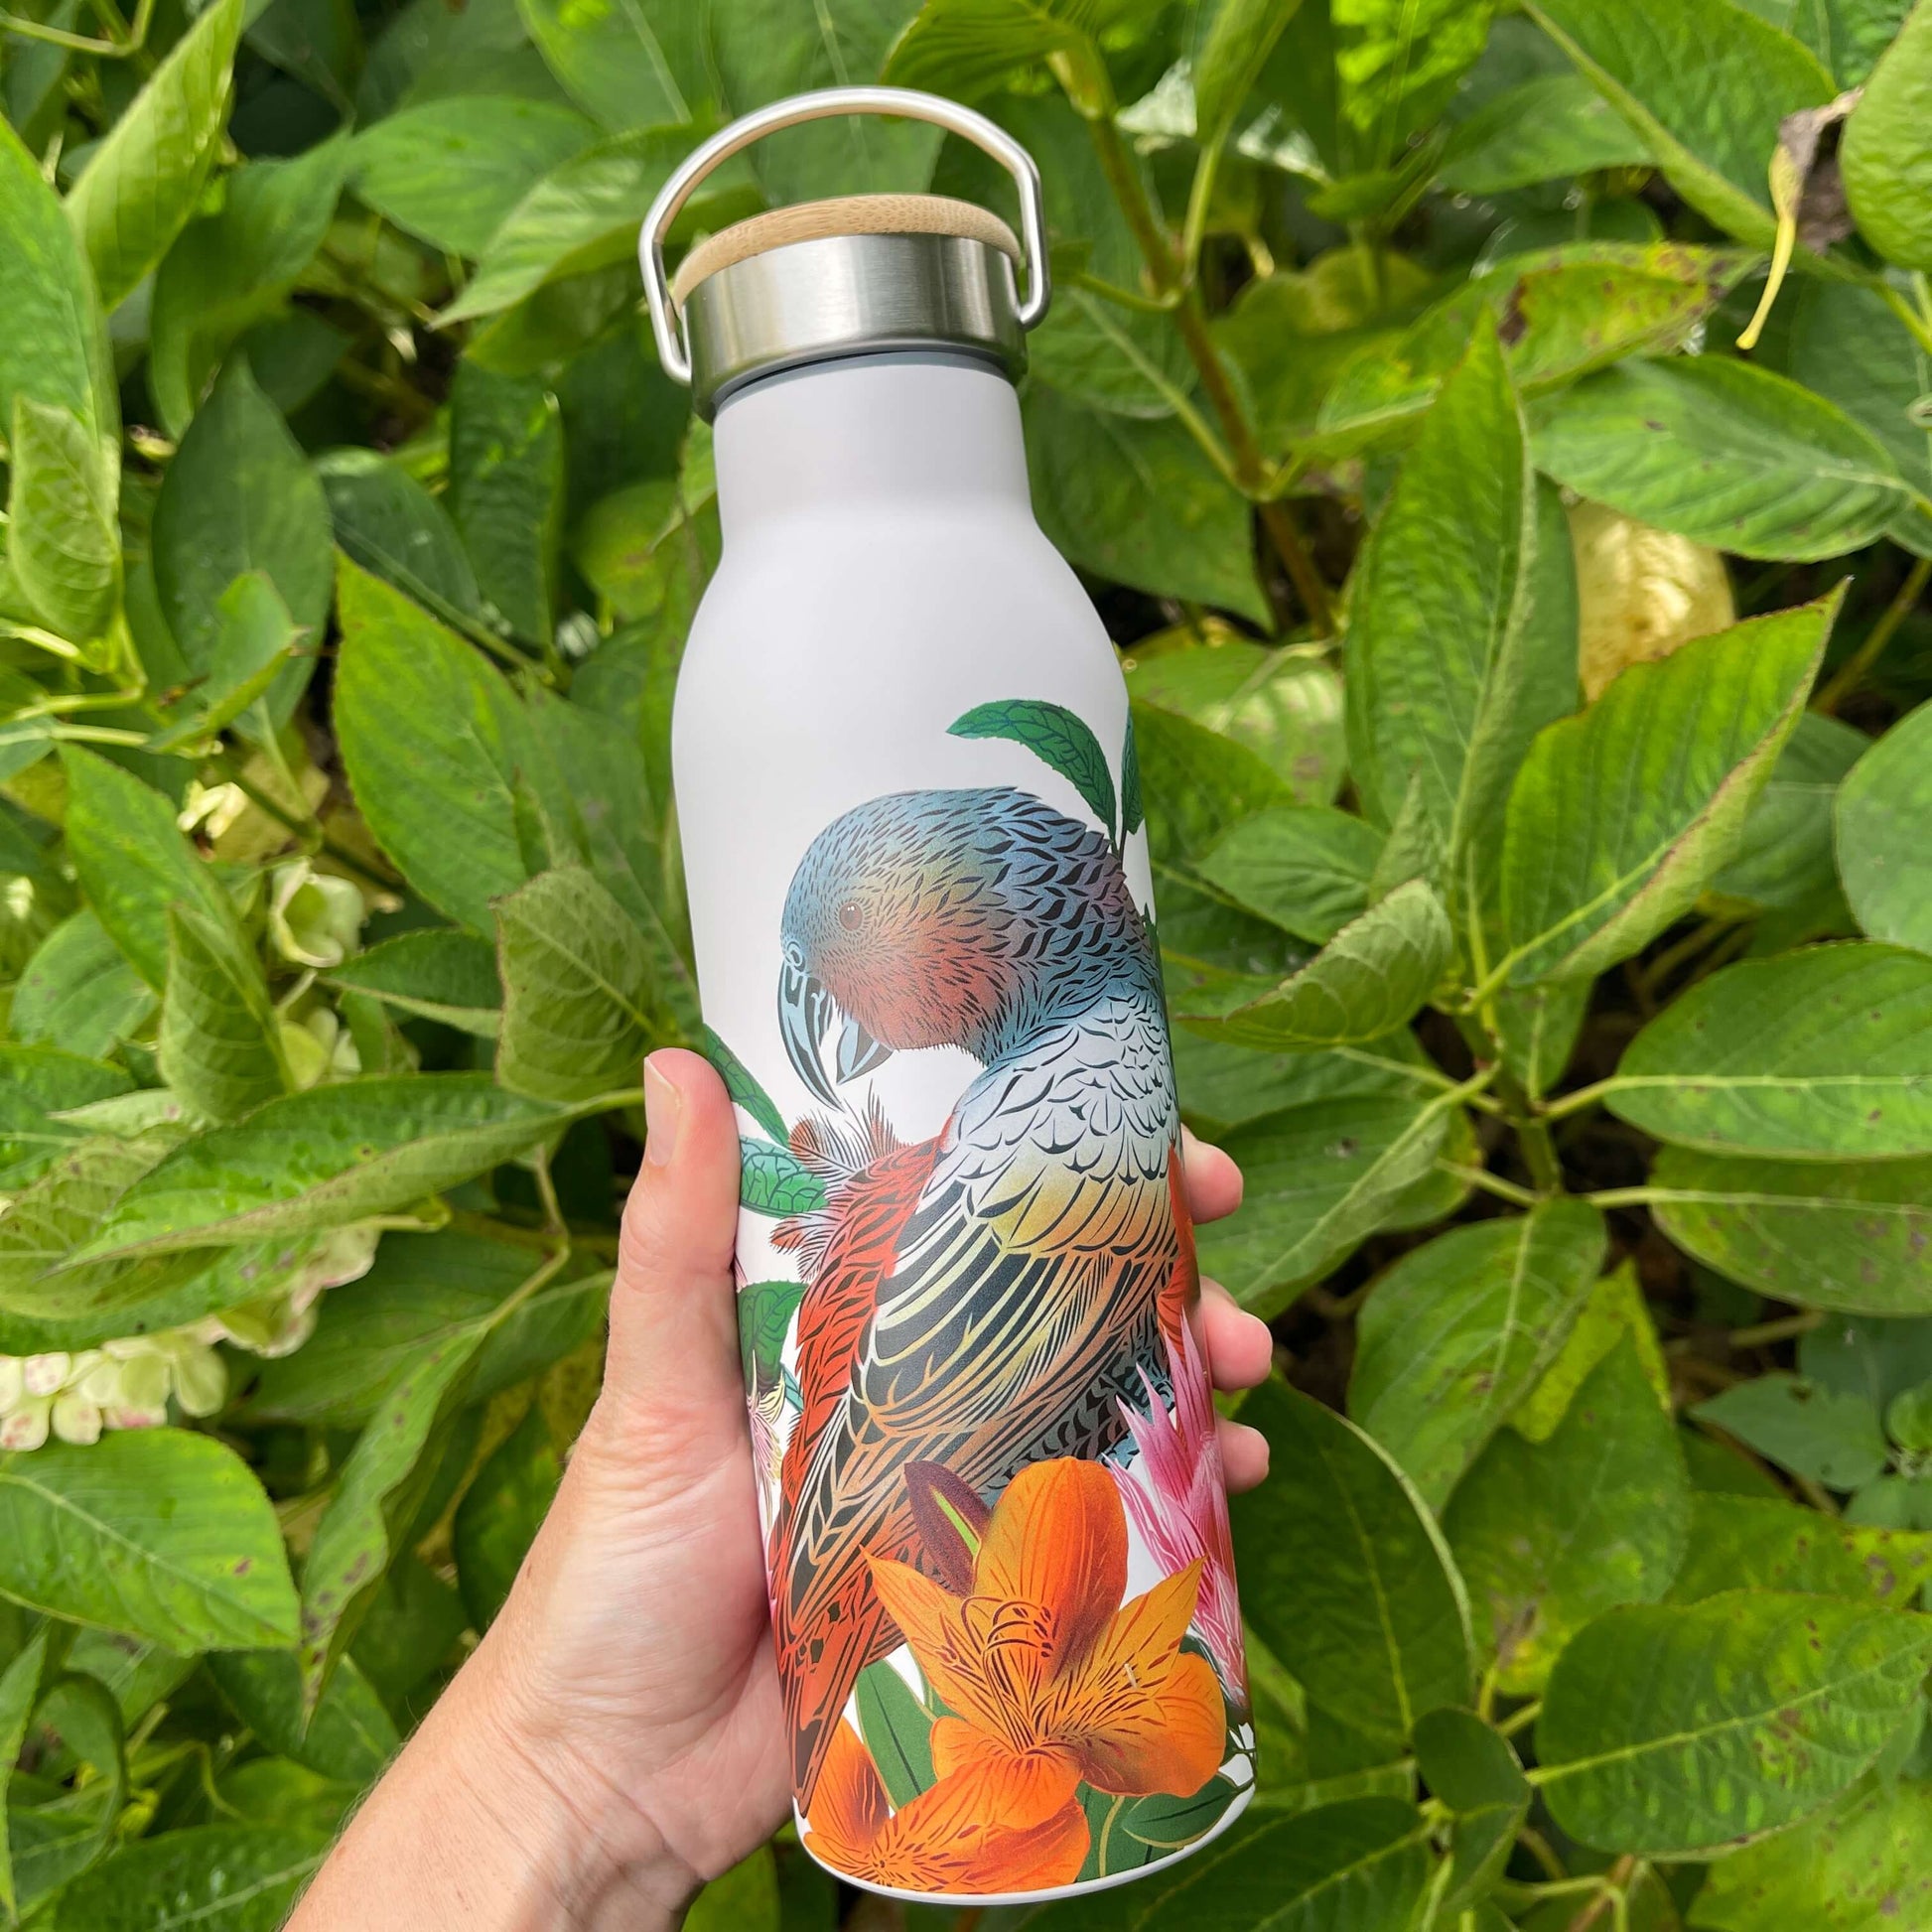 Womens hand holding a white drink bottle featuring artwork of a Kaka bird and flowers. Bottle has a stainless and wooden screw top with handle.